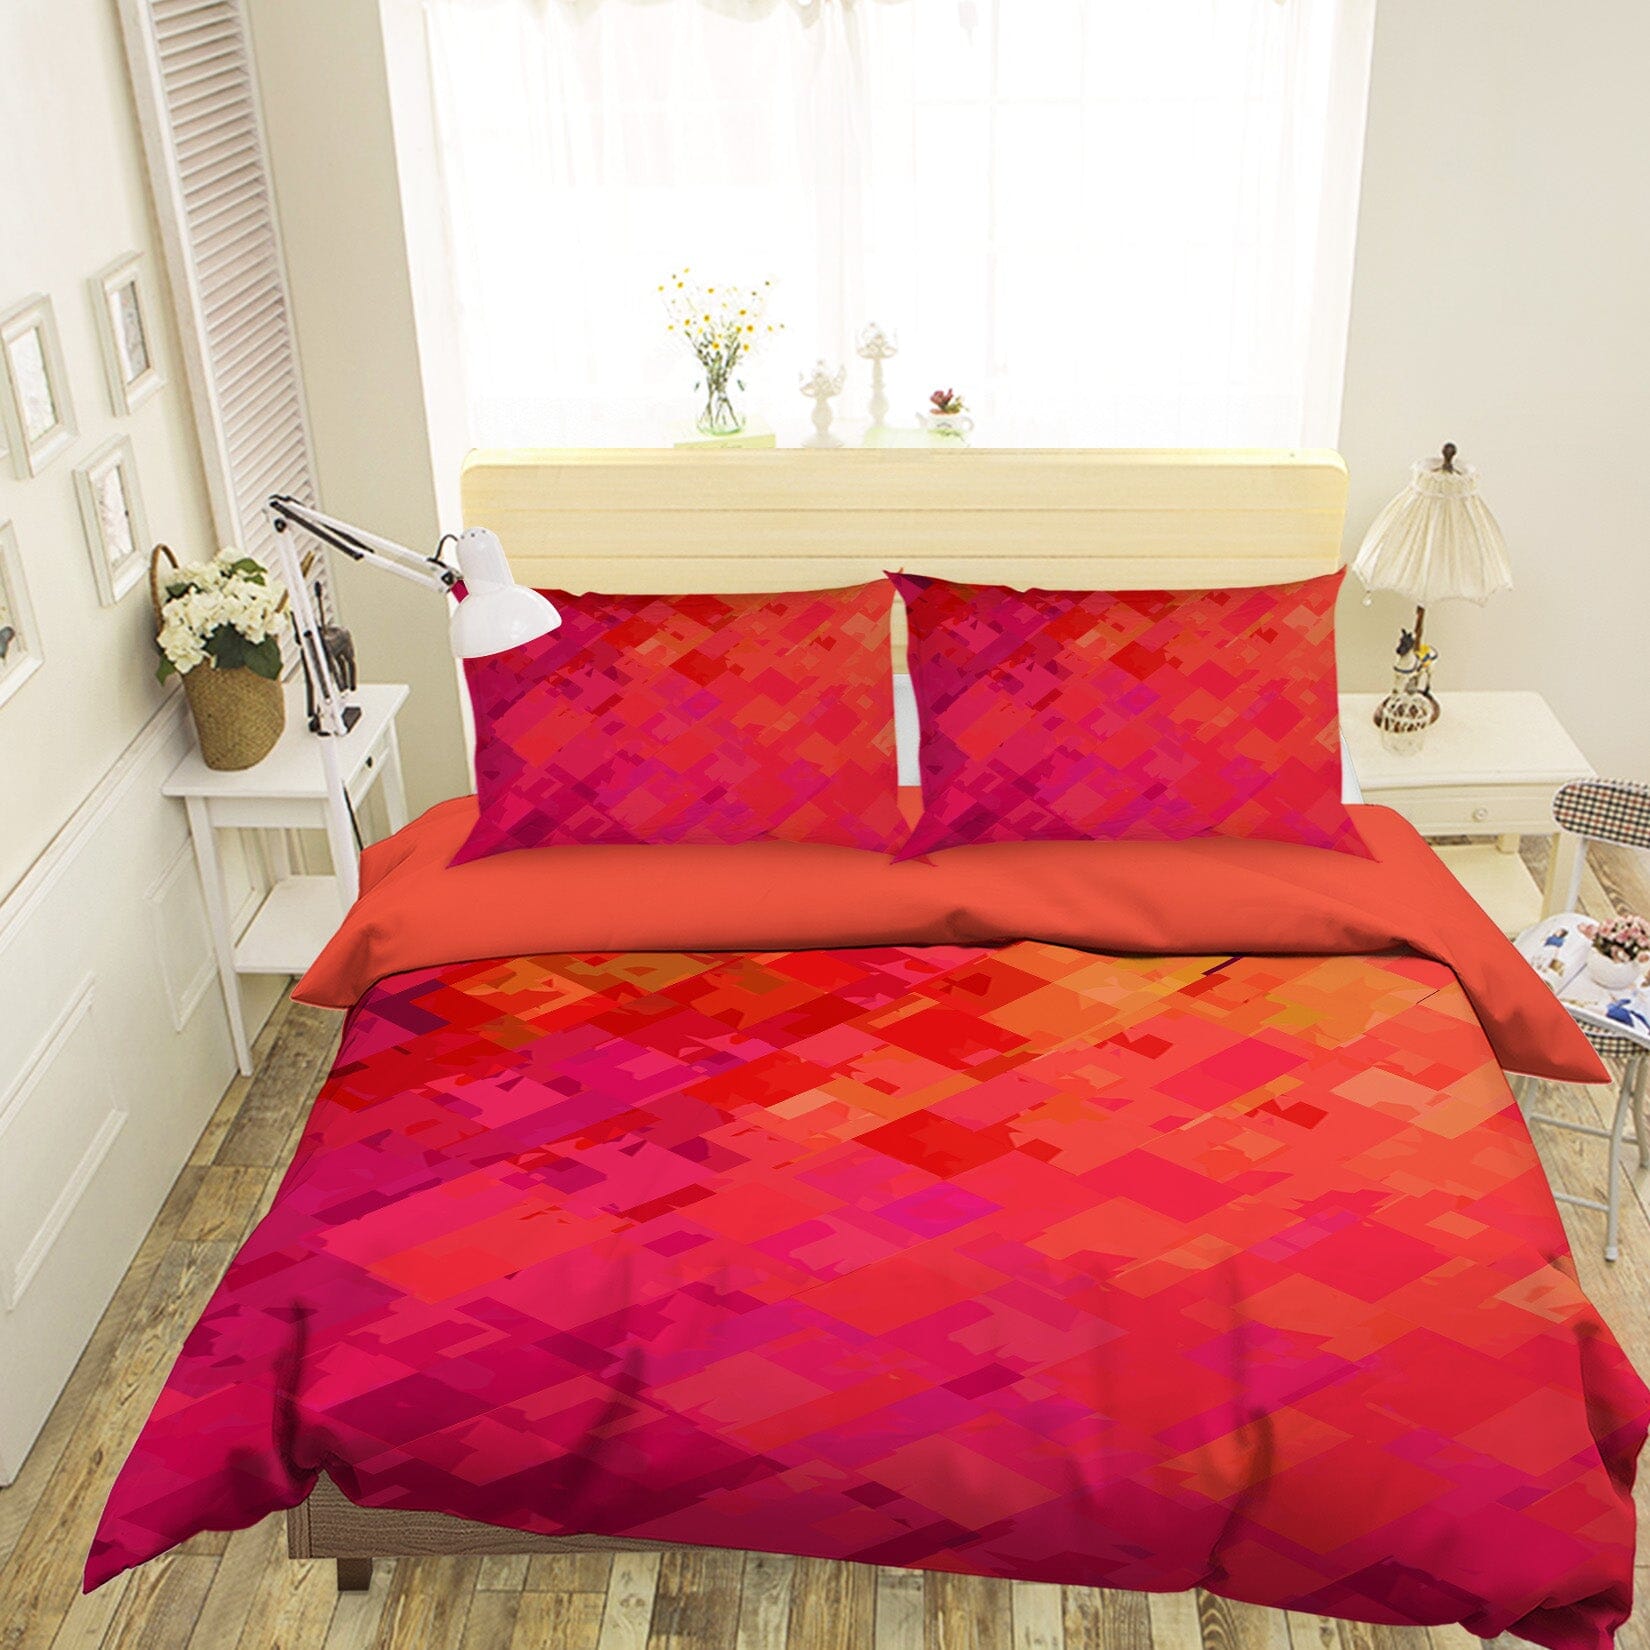 3D Orange Red Graffiti 2005 Shandra Smith Bedding Bed Pillowcases Quilt Quiet Covers AJ Creativity Home 